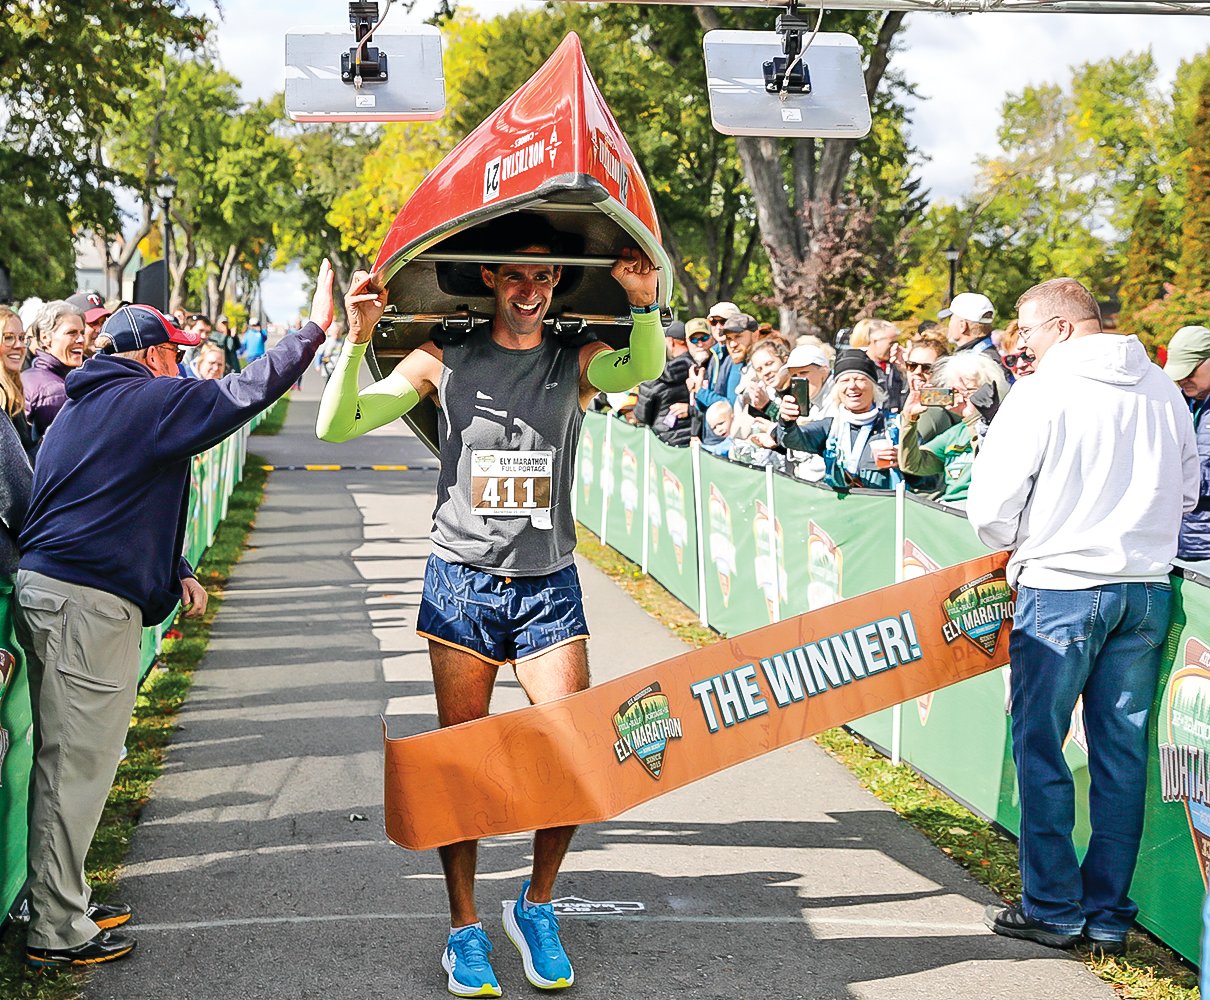 Left: 
Last year’s canoe 
portage marathon winner was looking good as he came across the finish line in Whiteside Park amidst a large crowd of cheering fans. It all kicks off again on Saturday with the seventh running of the Ely Marathon.